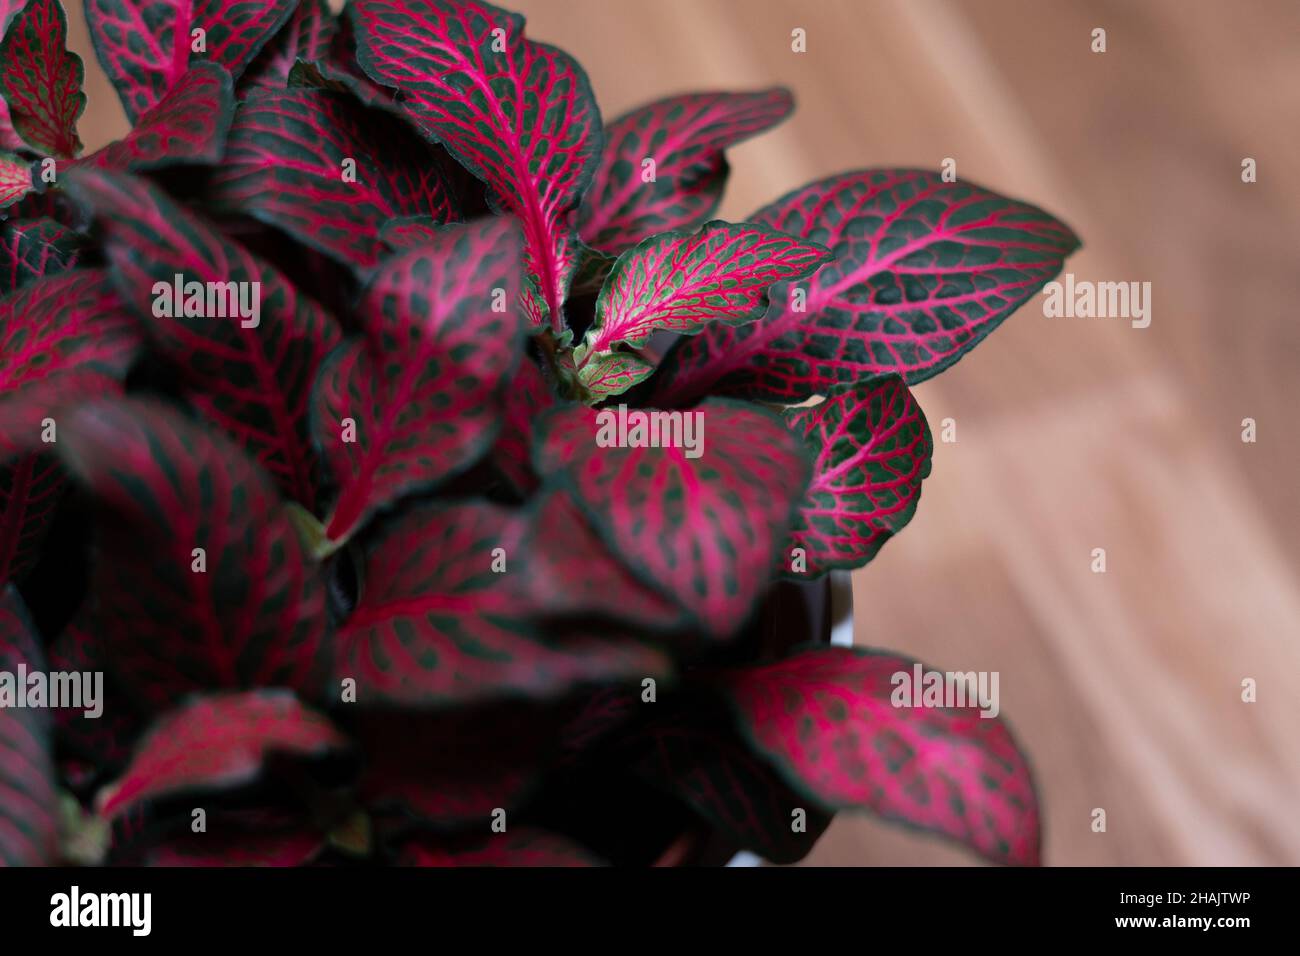 Fittonia Forest Flame Home Plant pink burning colors Home Decor Stock Photo